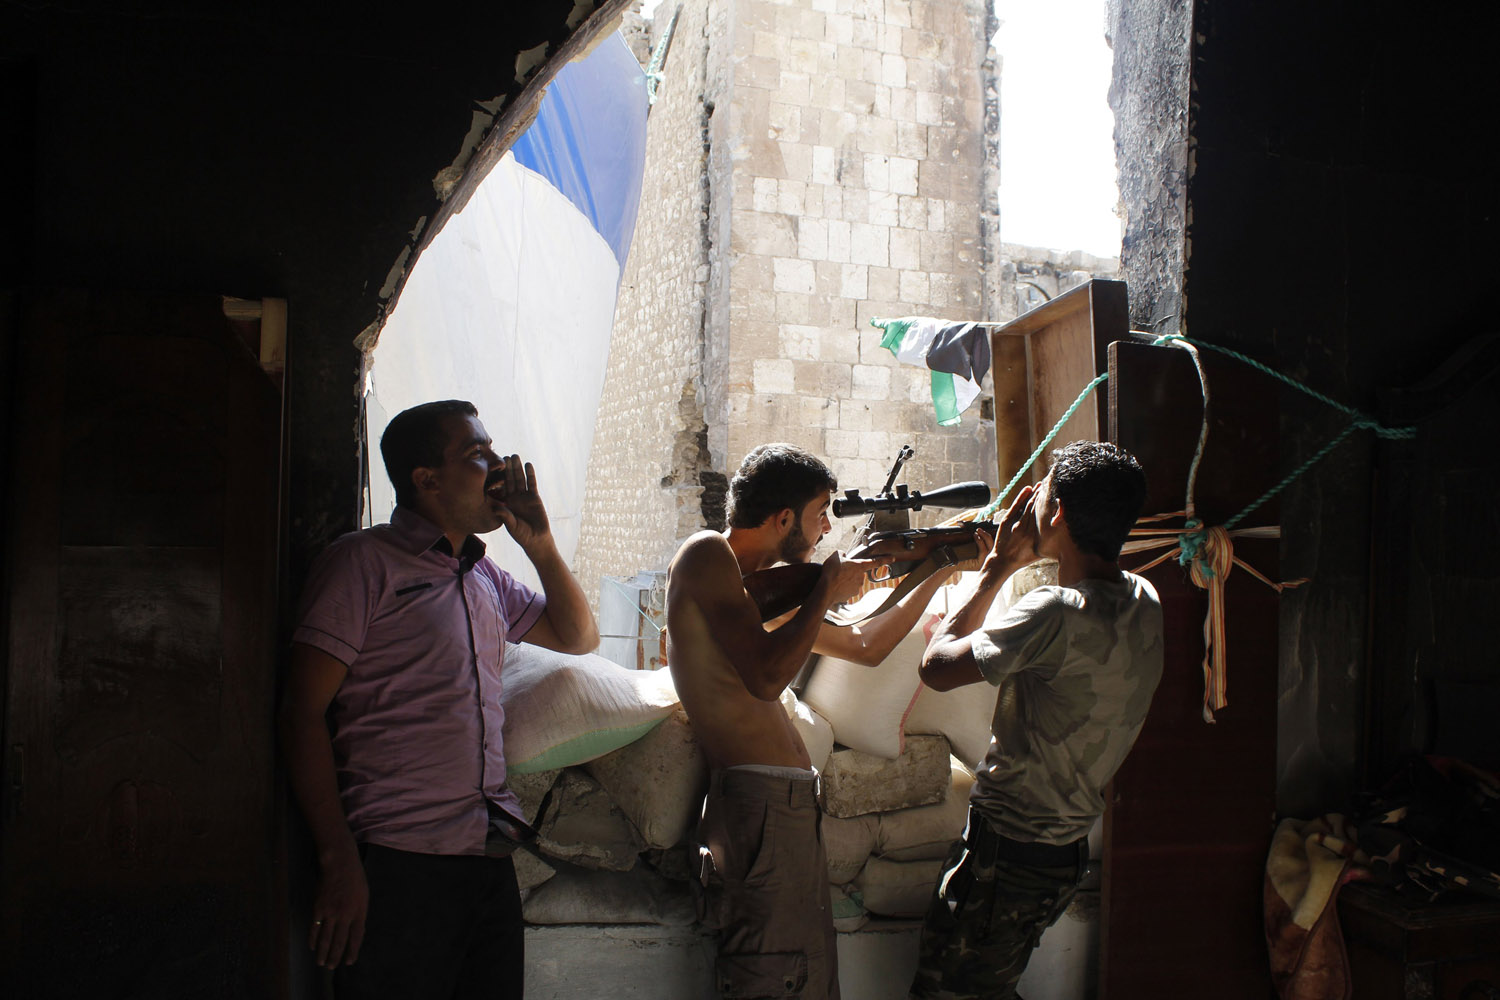 Free Syrian Army fighters call out to forces loyal to Syria's President Assad urging them to defect as another fighter stands guard in the old city of Aleppo